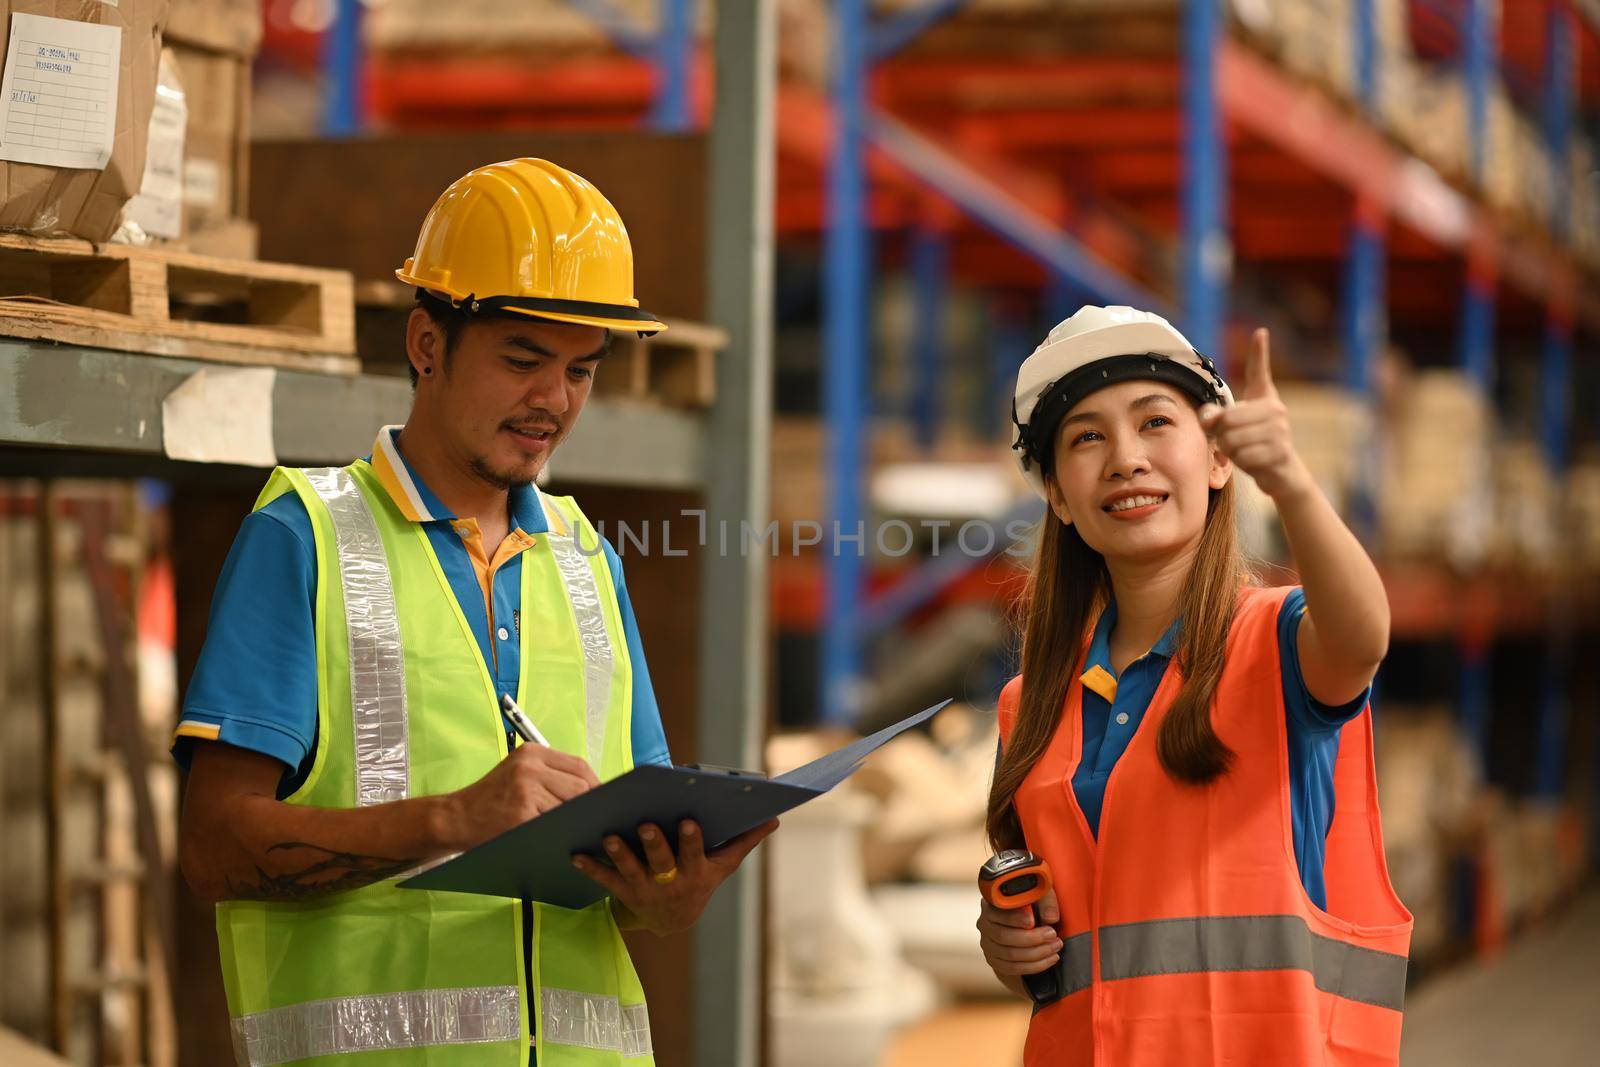 Warehouse workers wearing hardhats and reflective jackets using digital tablet, checking stock and order details in warehouse.